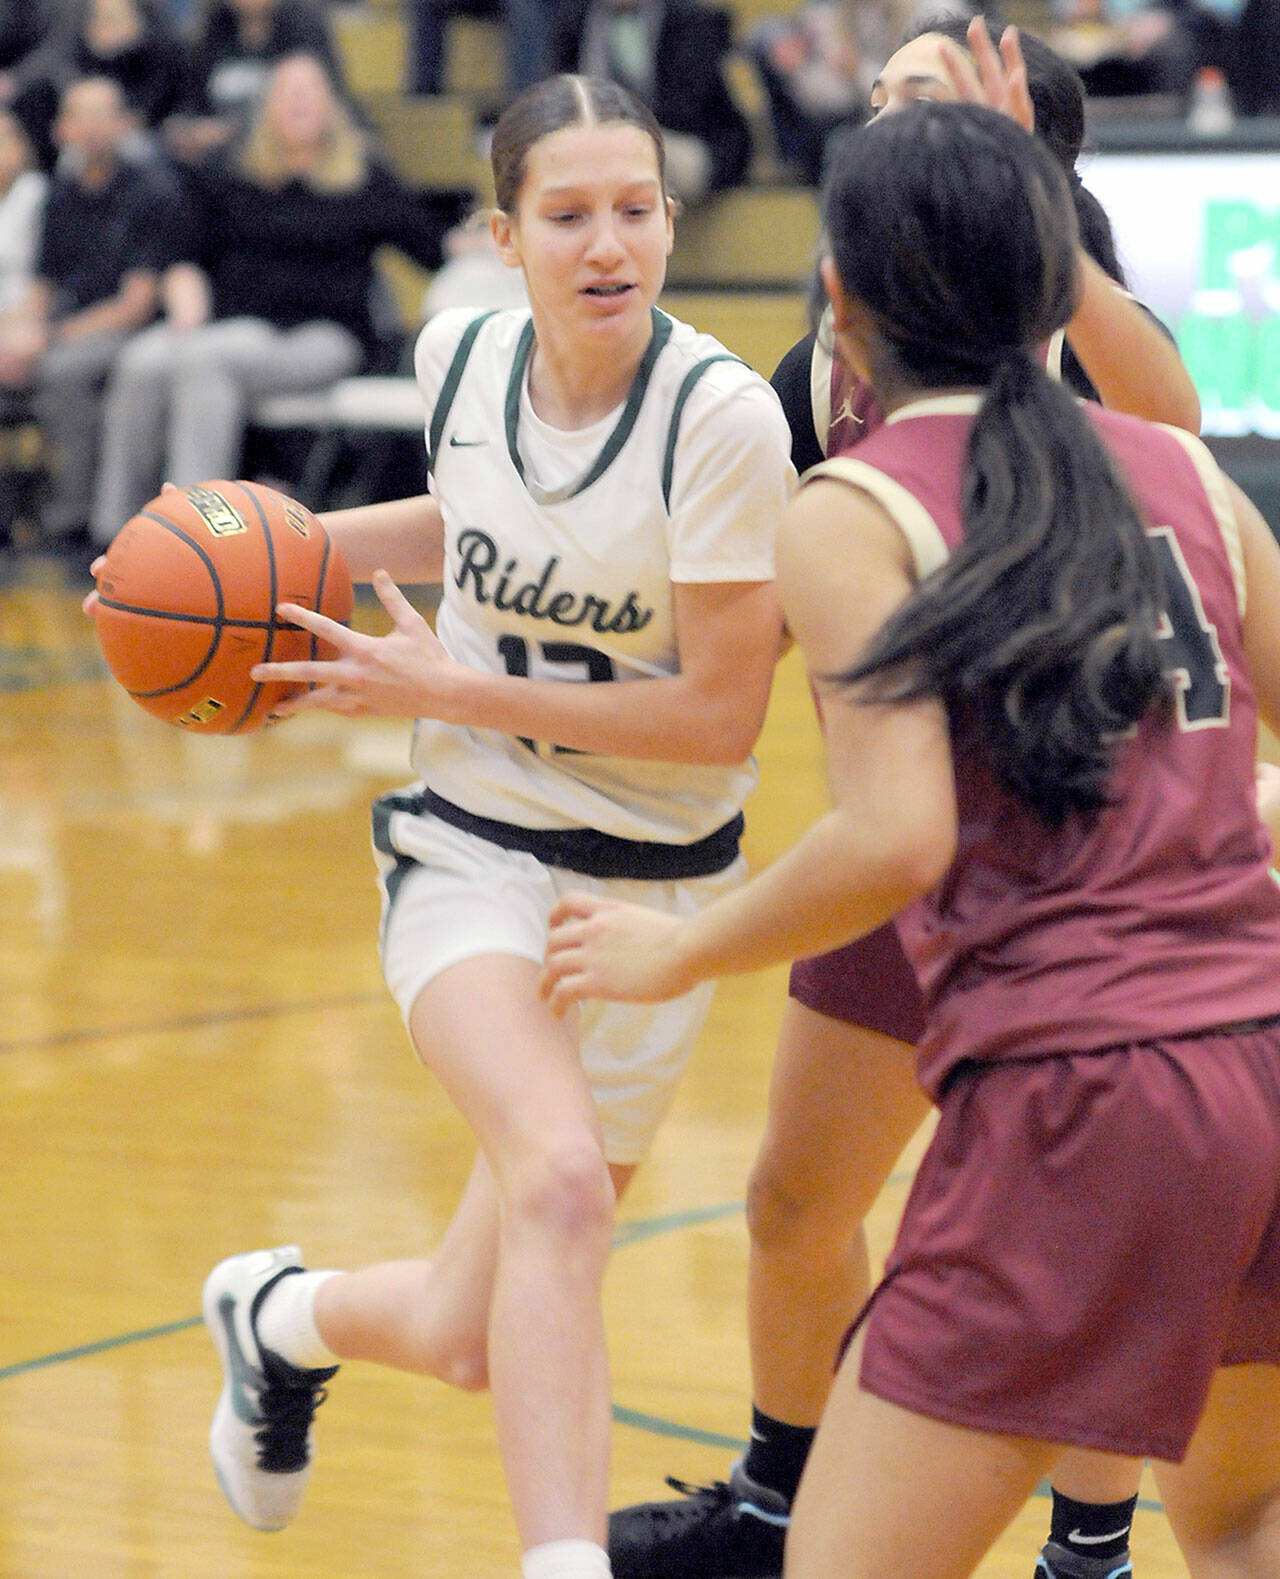 Port Angeles’ Morgan Politika, left, drives to the lane defended by Kingston’s Tati Fontes-Lawrence, right, on Tuesday night in Port Angeles. (Keith Thorpe/Peninsula Daily News)